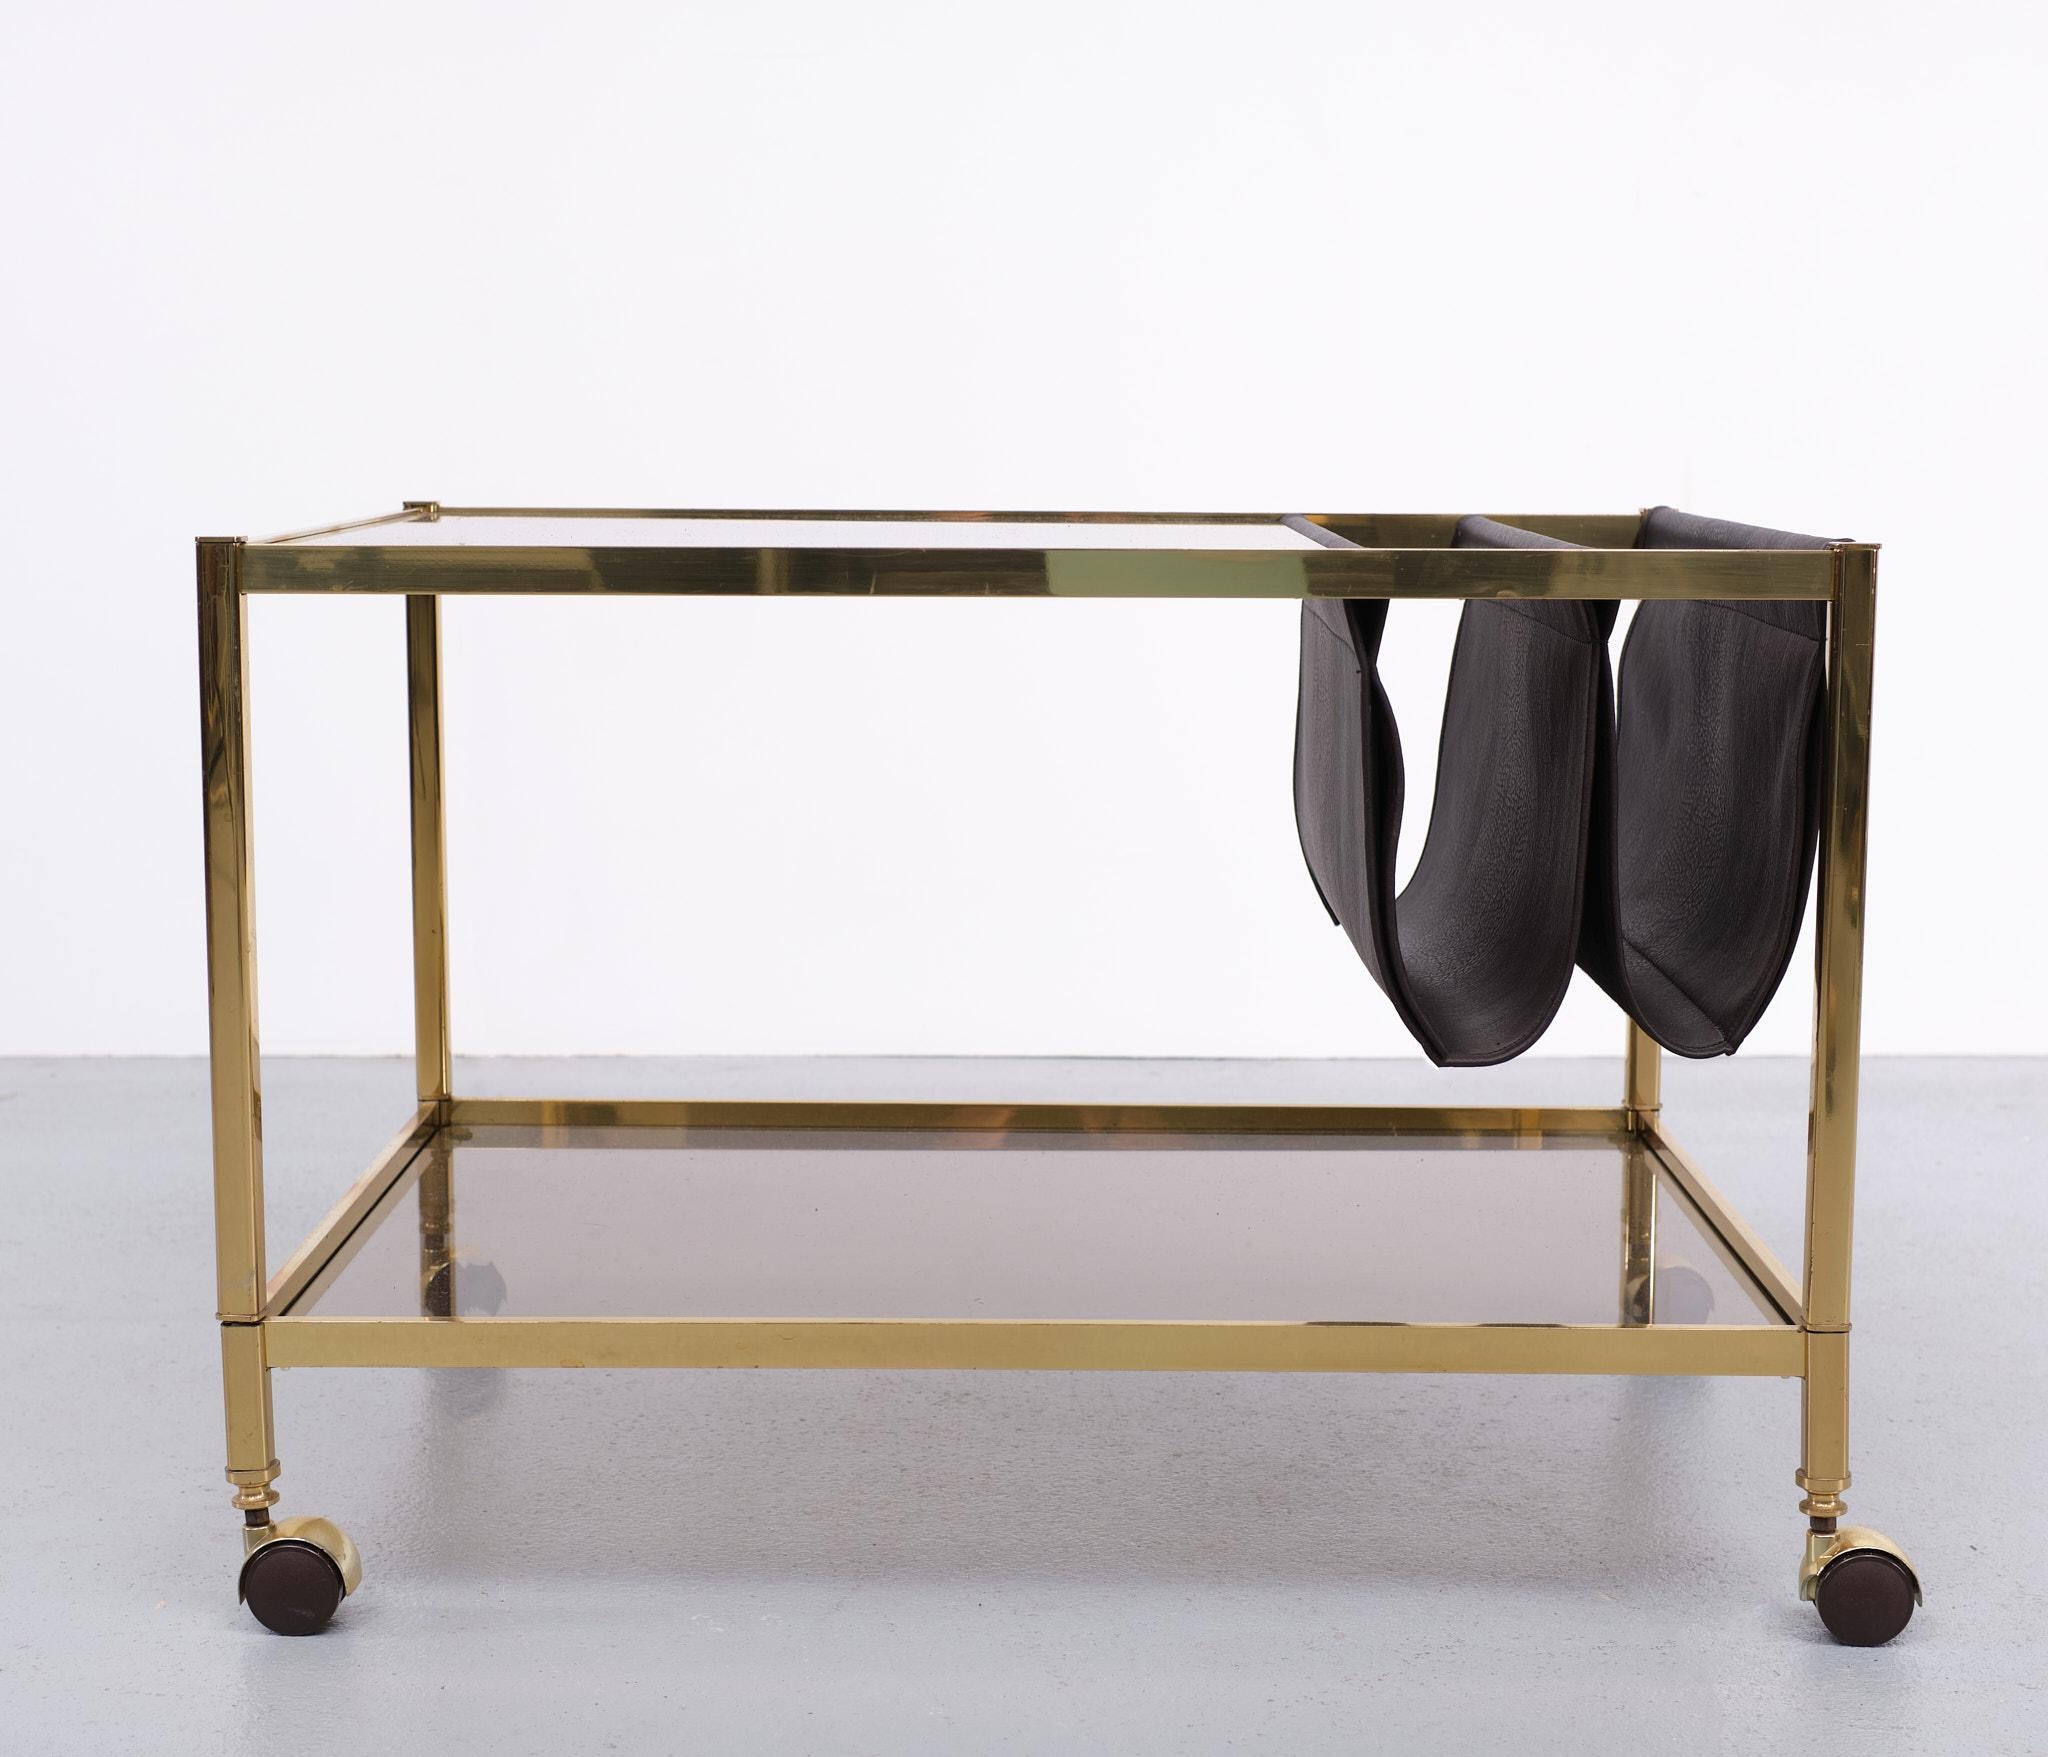 Beautiful magazine holder, trolley, side table. Three in one Love the color 
combination. Brass, dark brown leather and smoked glass tops on wheels.
Superb piece. In a good condition. Jacques Adnet in style.